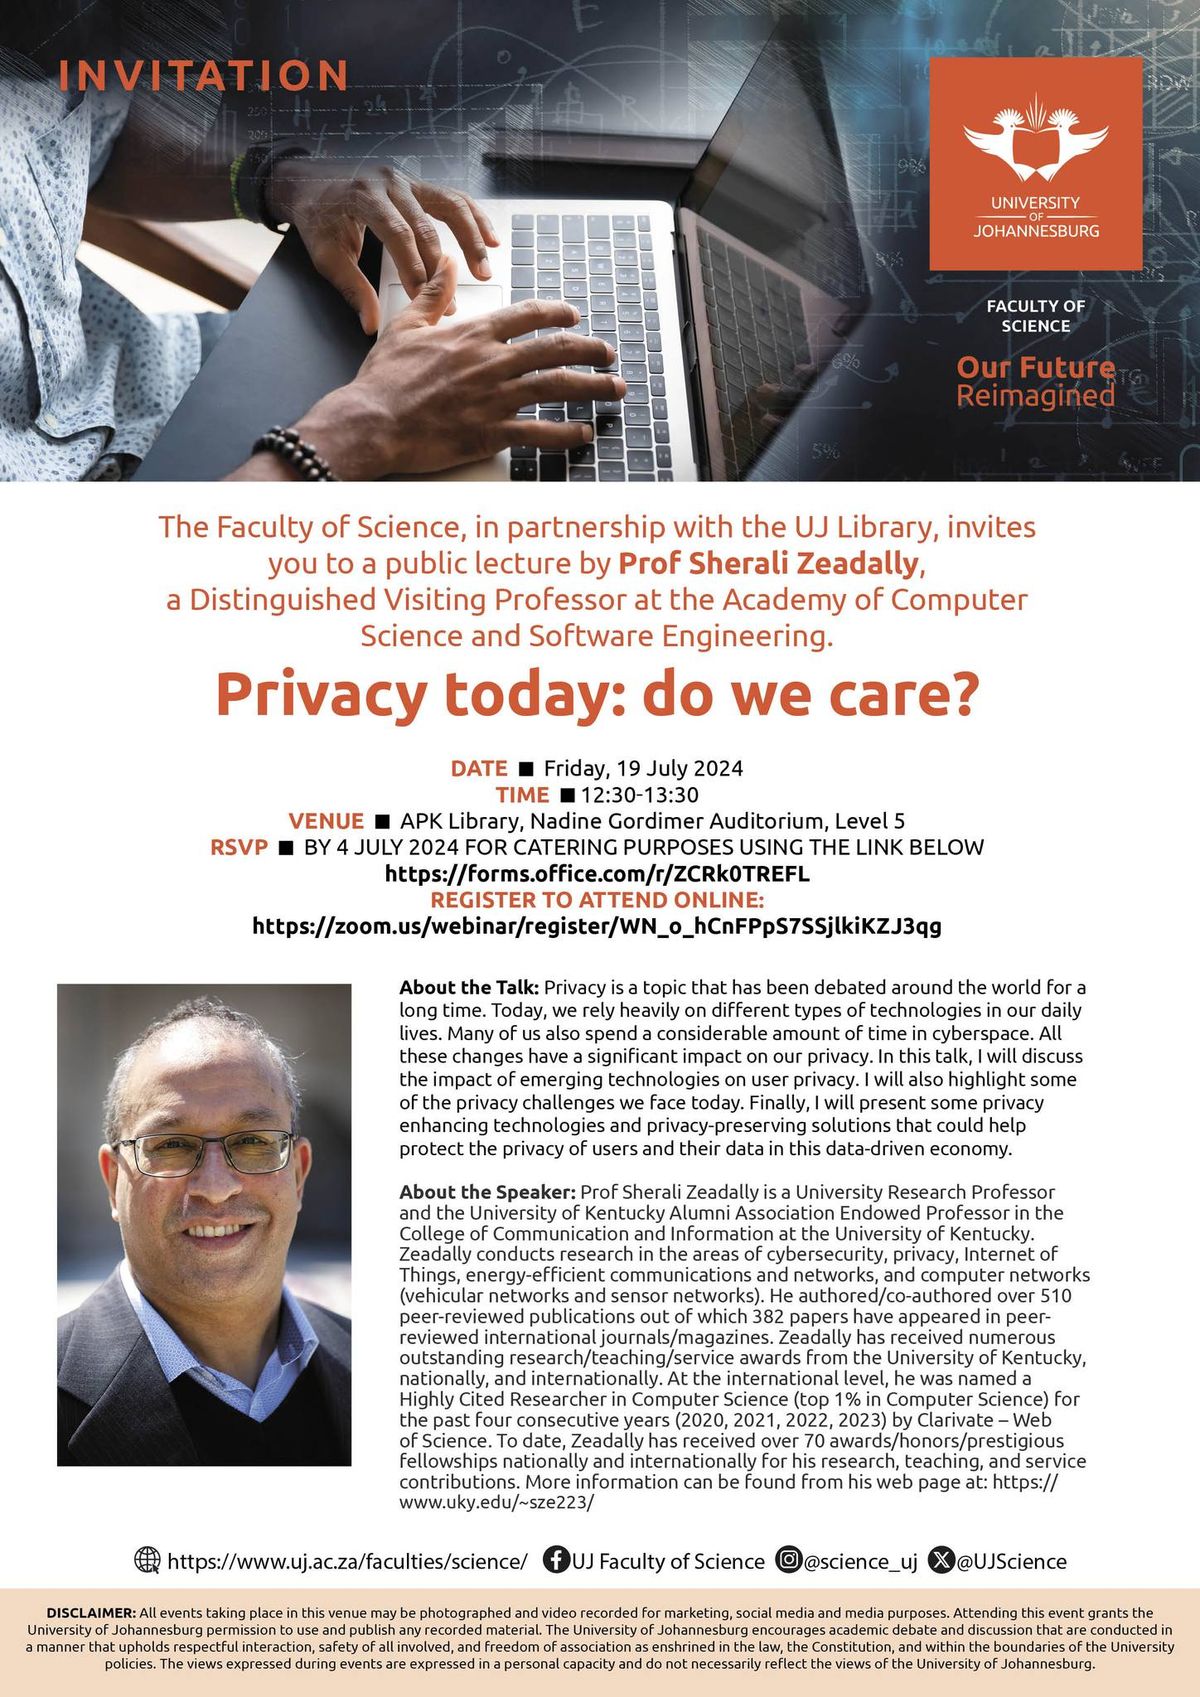 Public Lecture by Prof Sherali Zeadally,Distinguished Visiting Professor: Privacy today: do we care?